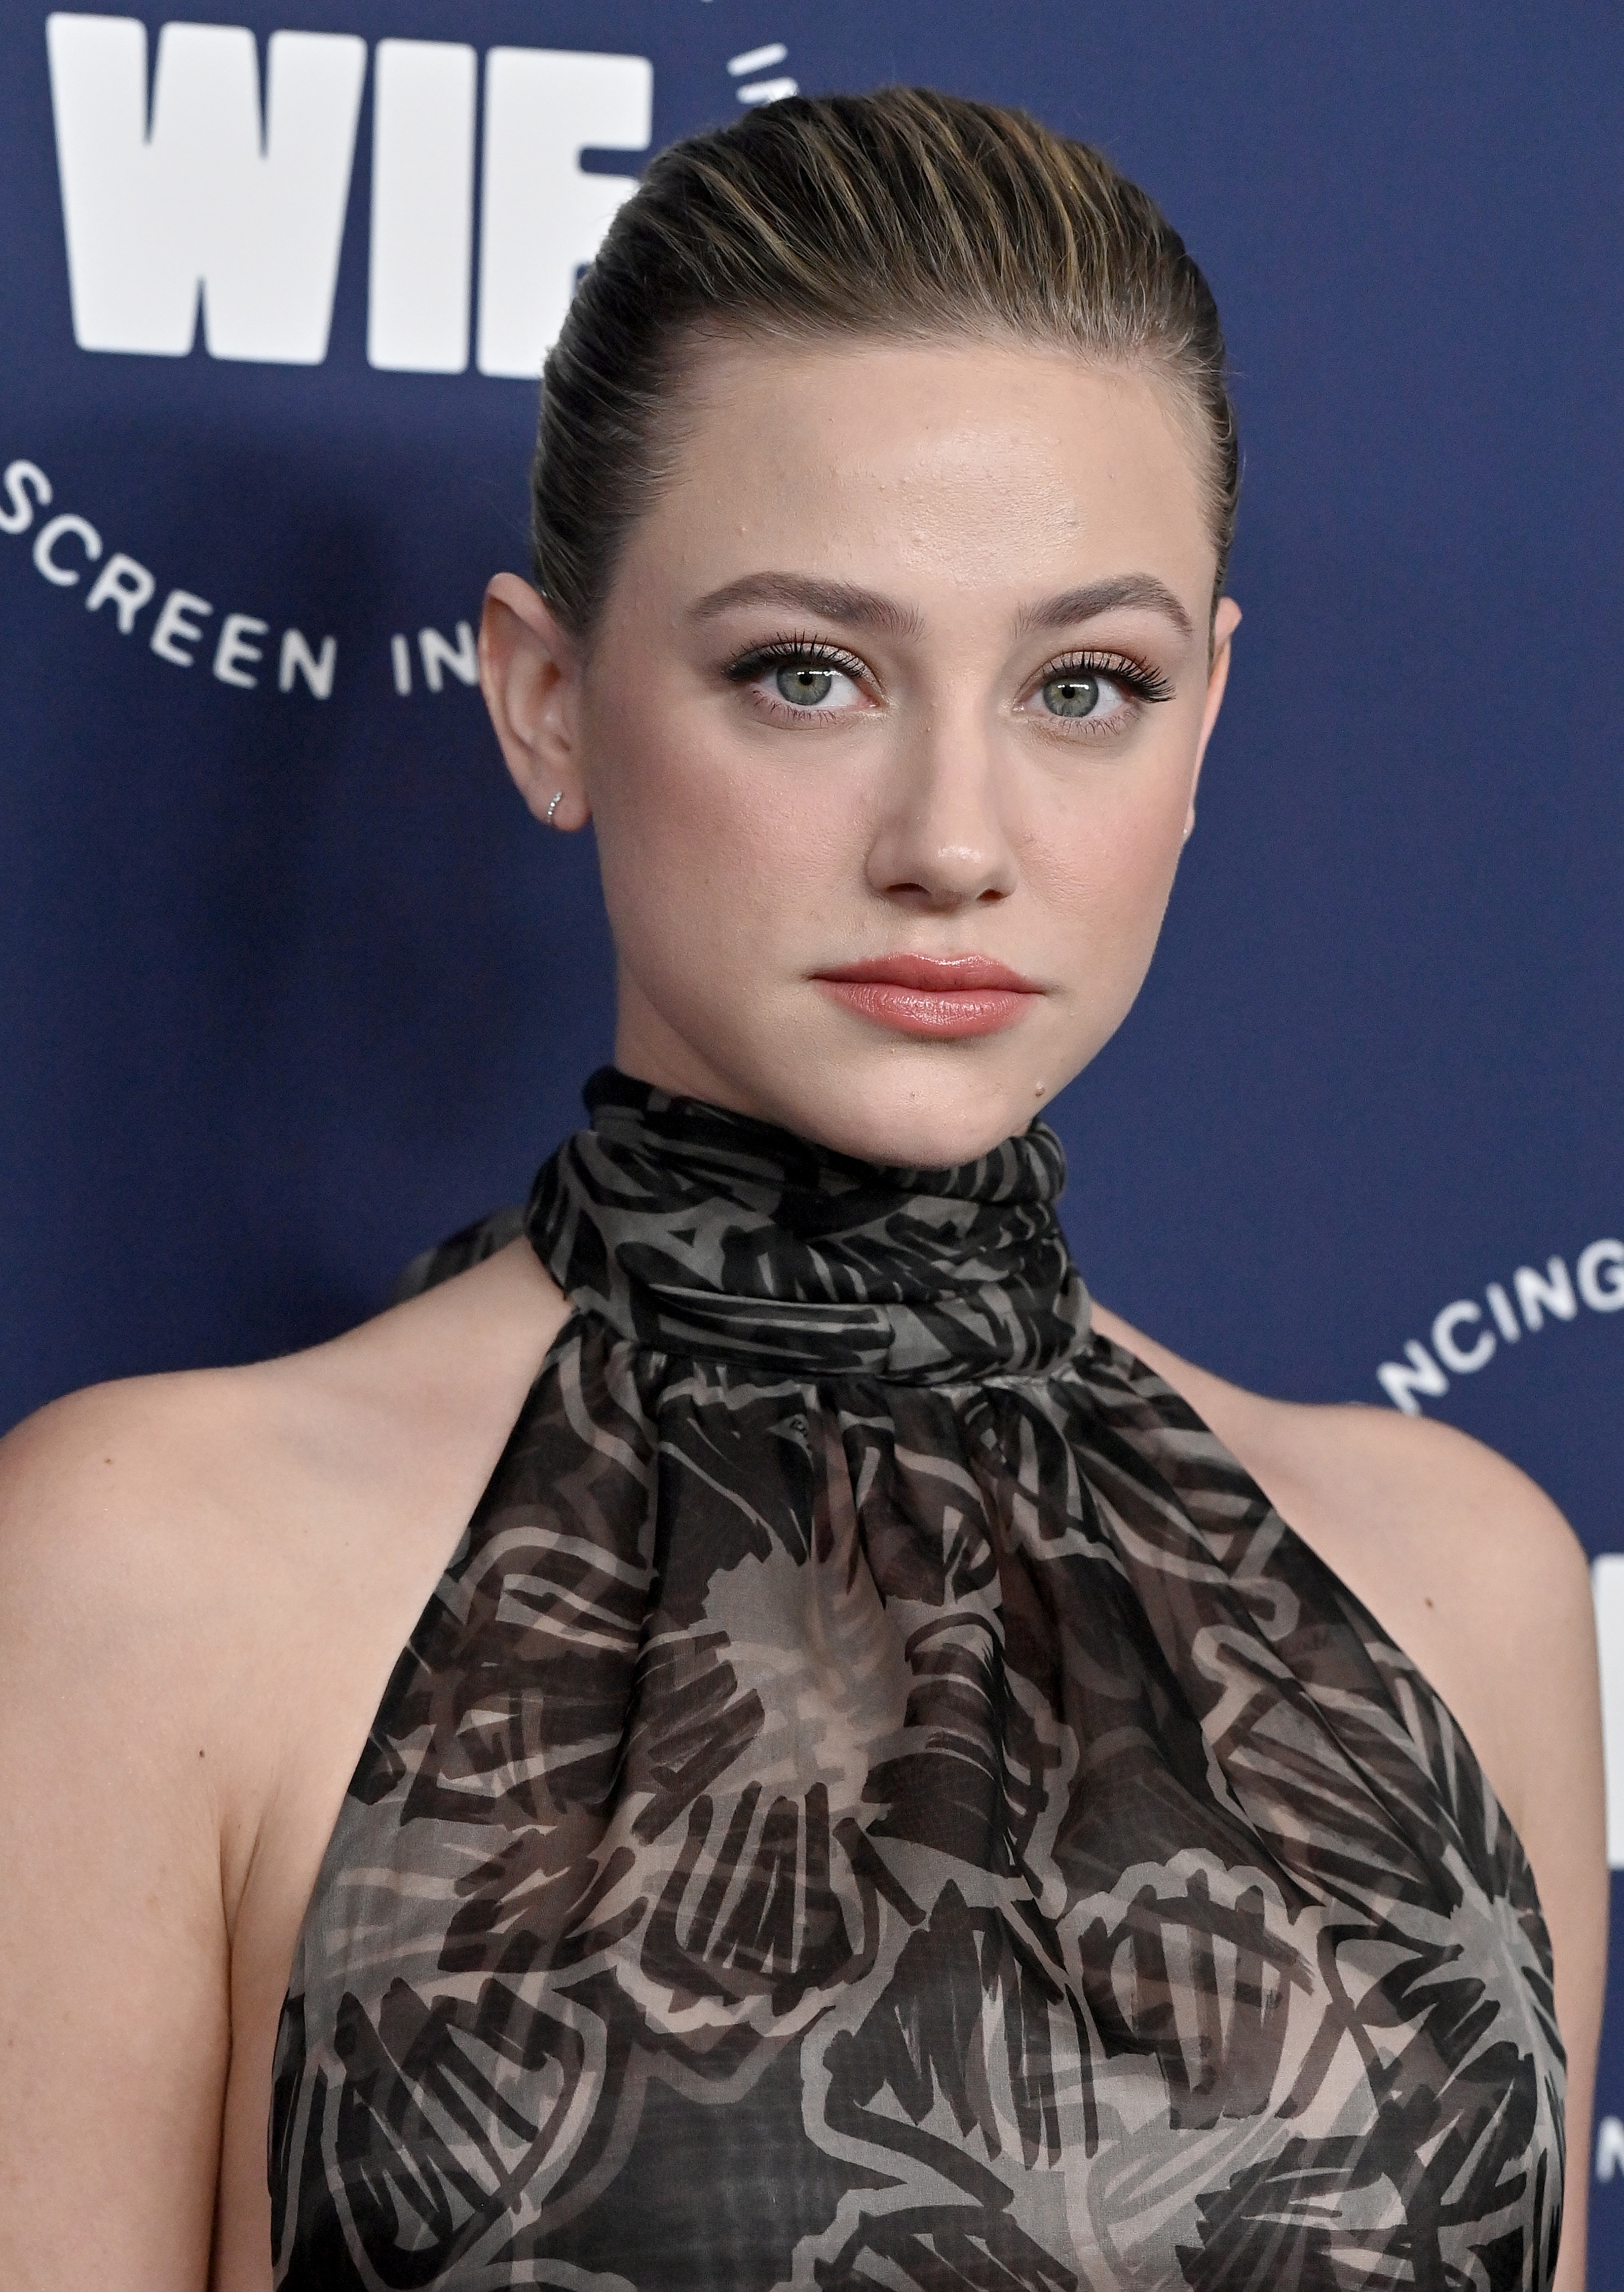 Close-up of Lili at a media event in a halter top